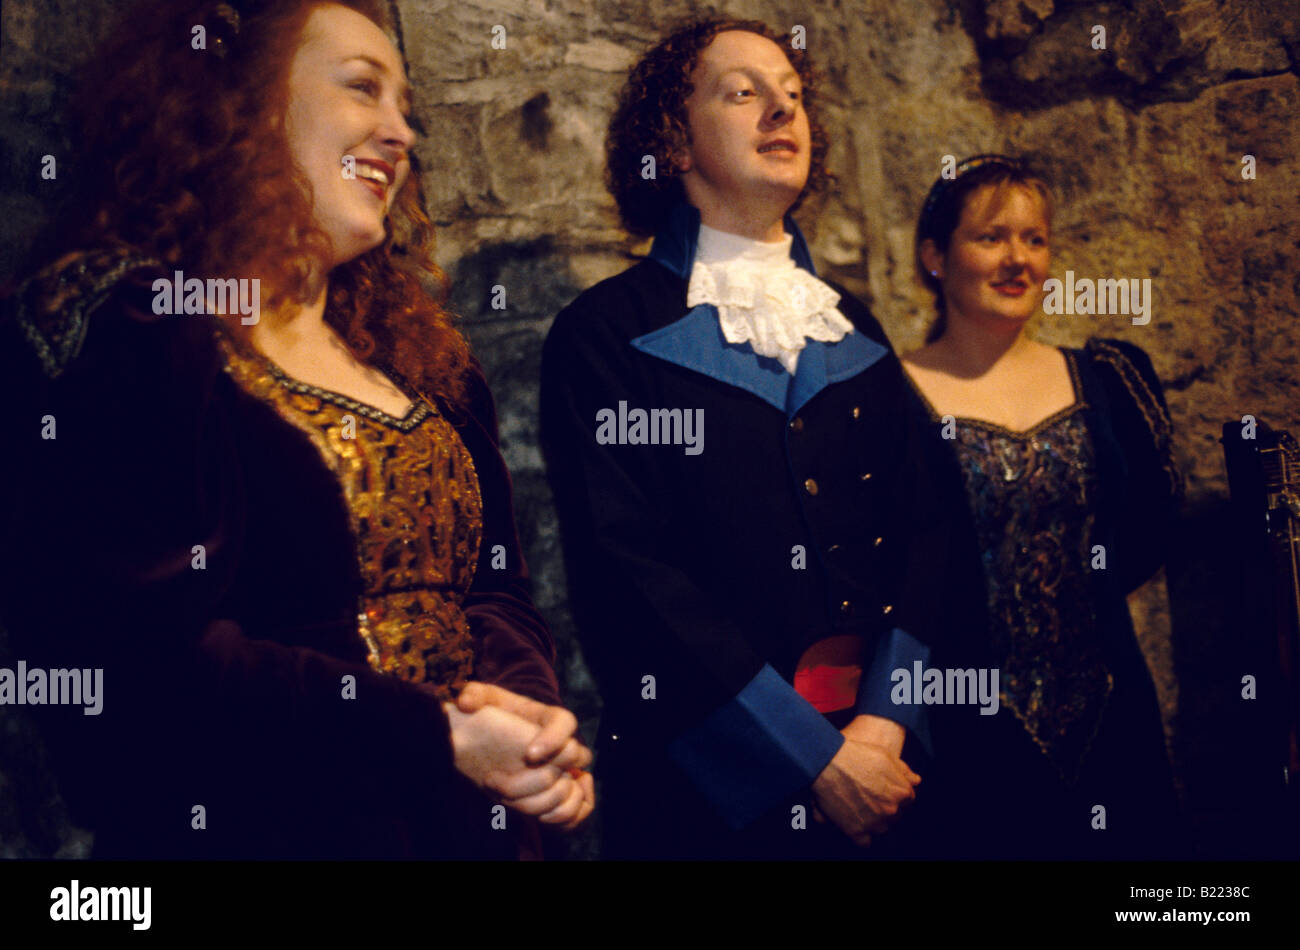 Three women in historic dress at medieval banquet Dunguaire castle County Galway Ireland Stock Photo